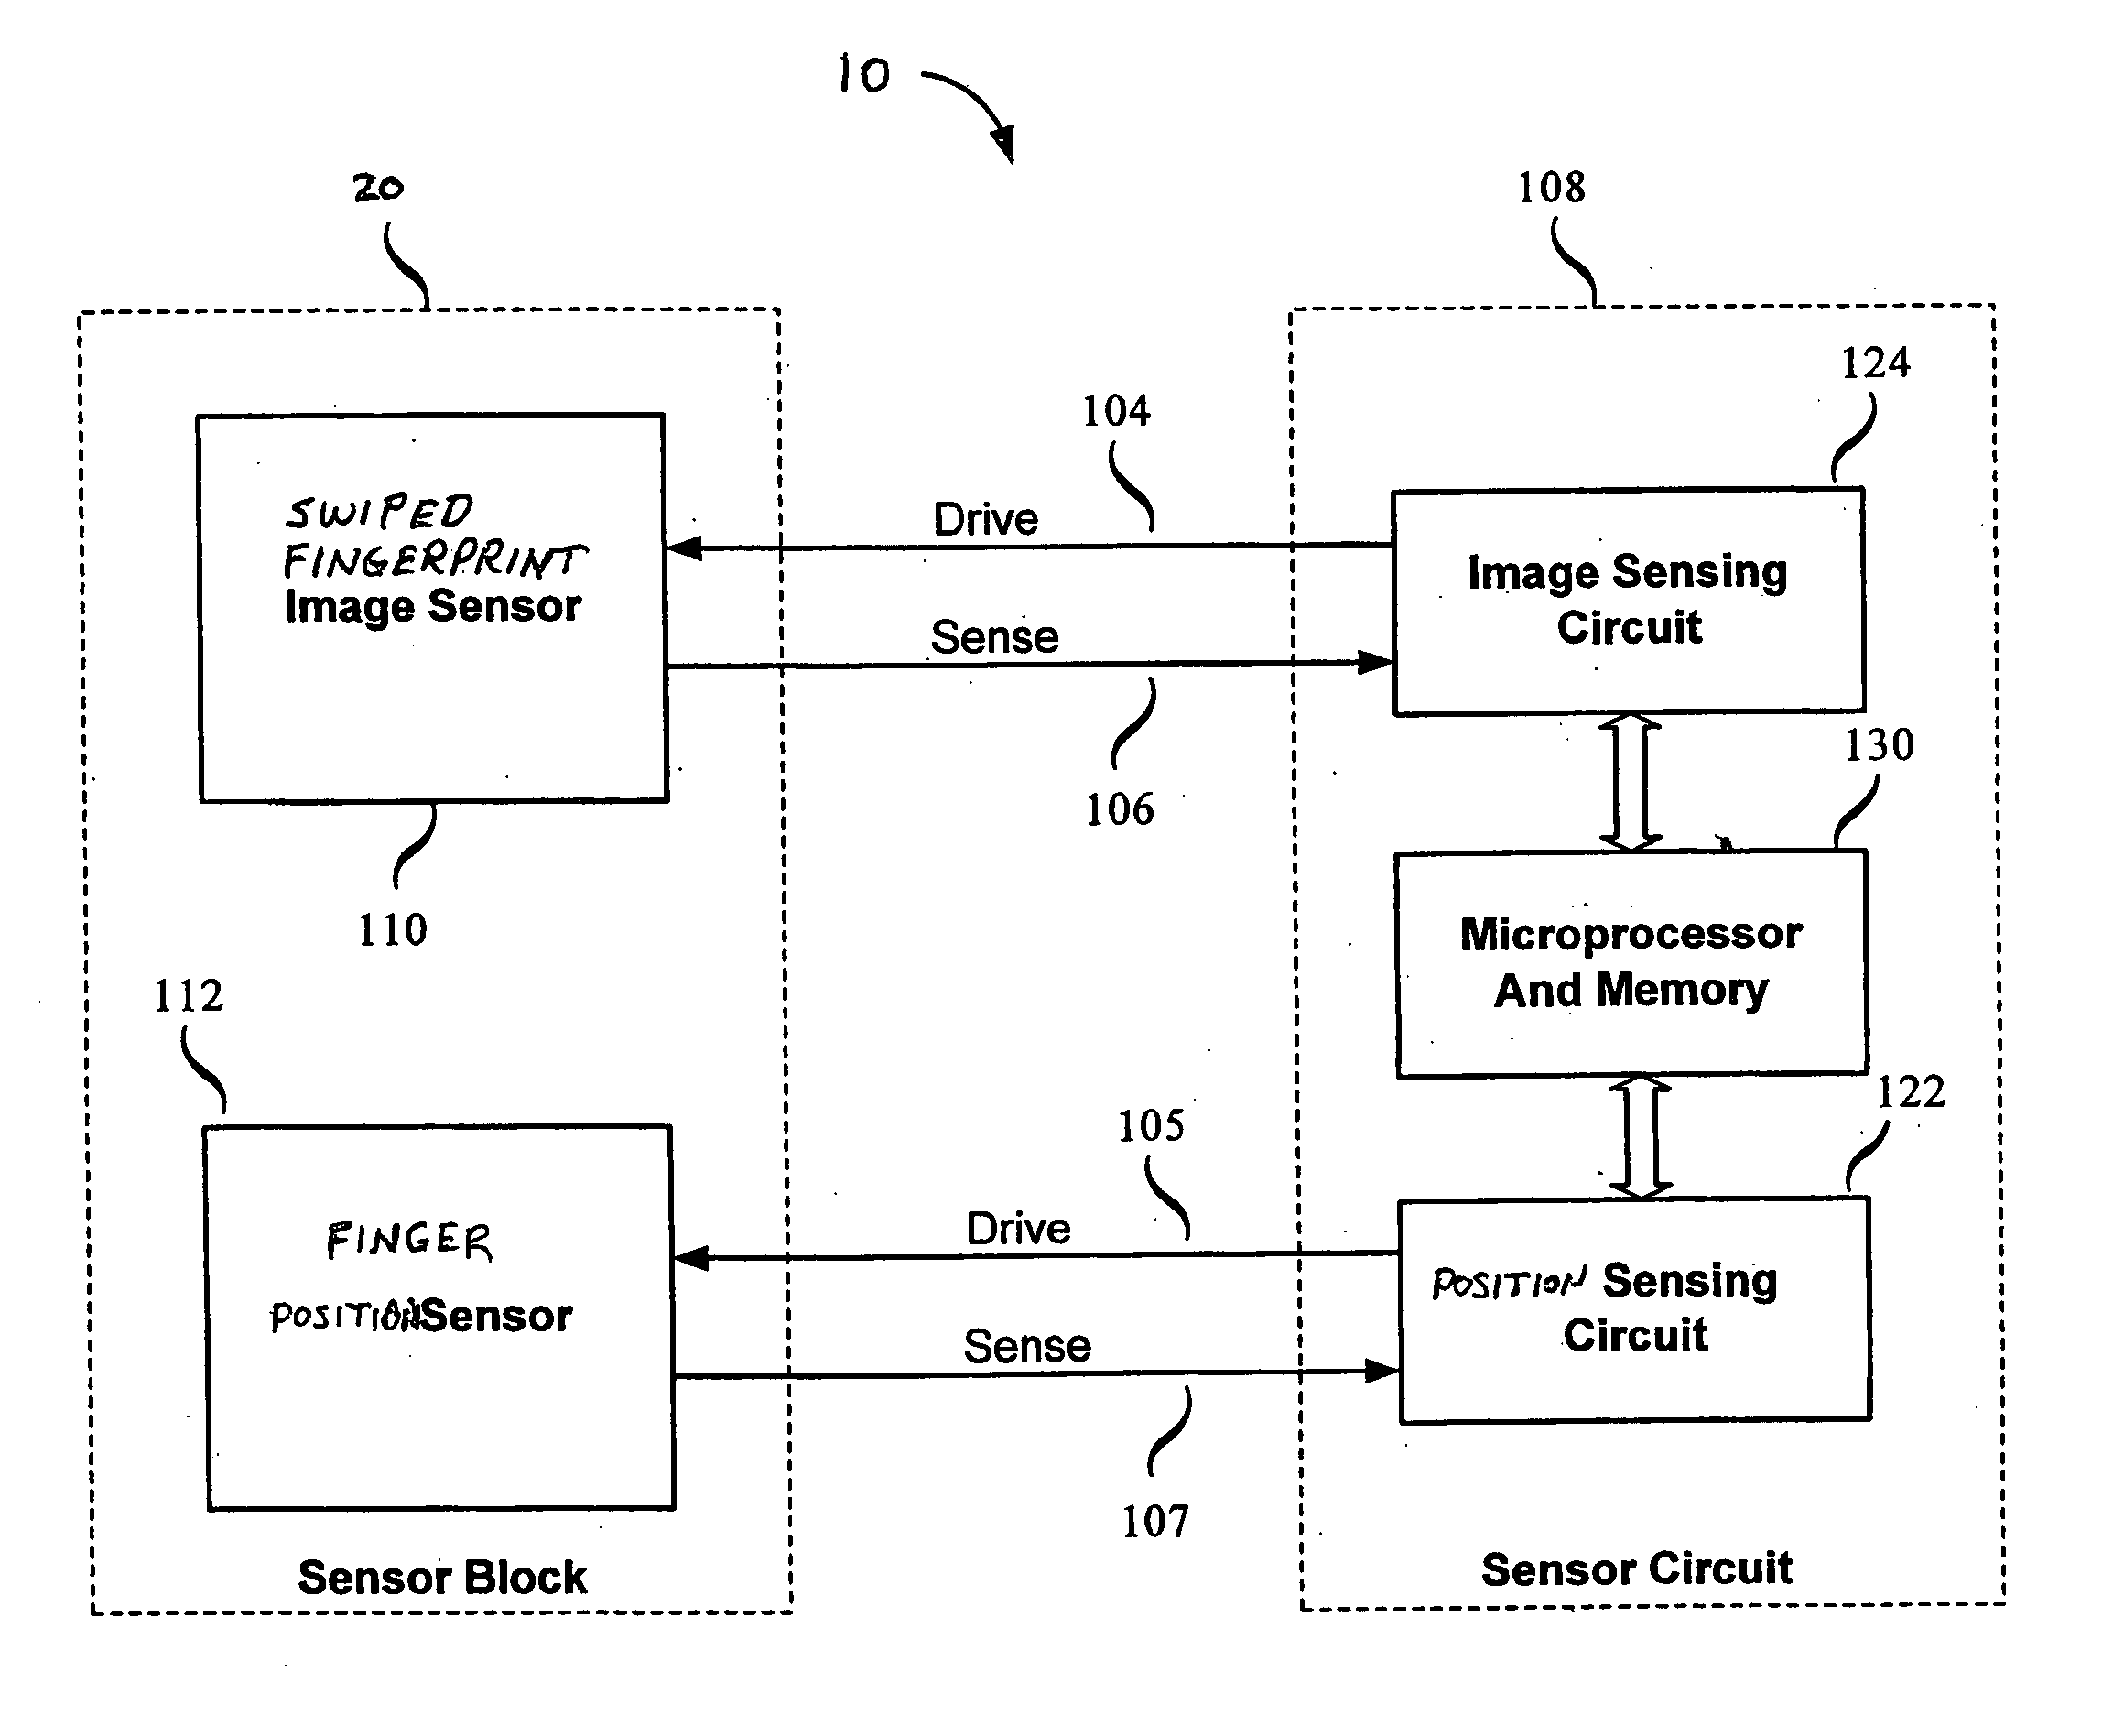 Methods and apparatus for acquiring a swiped fingerprint image